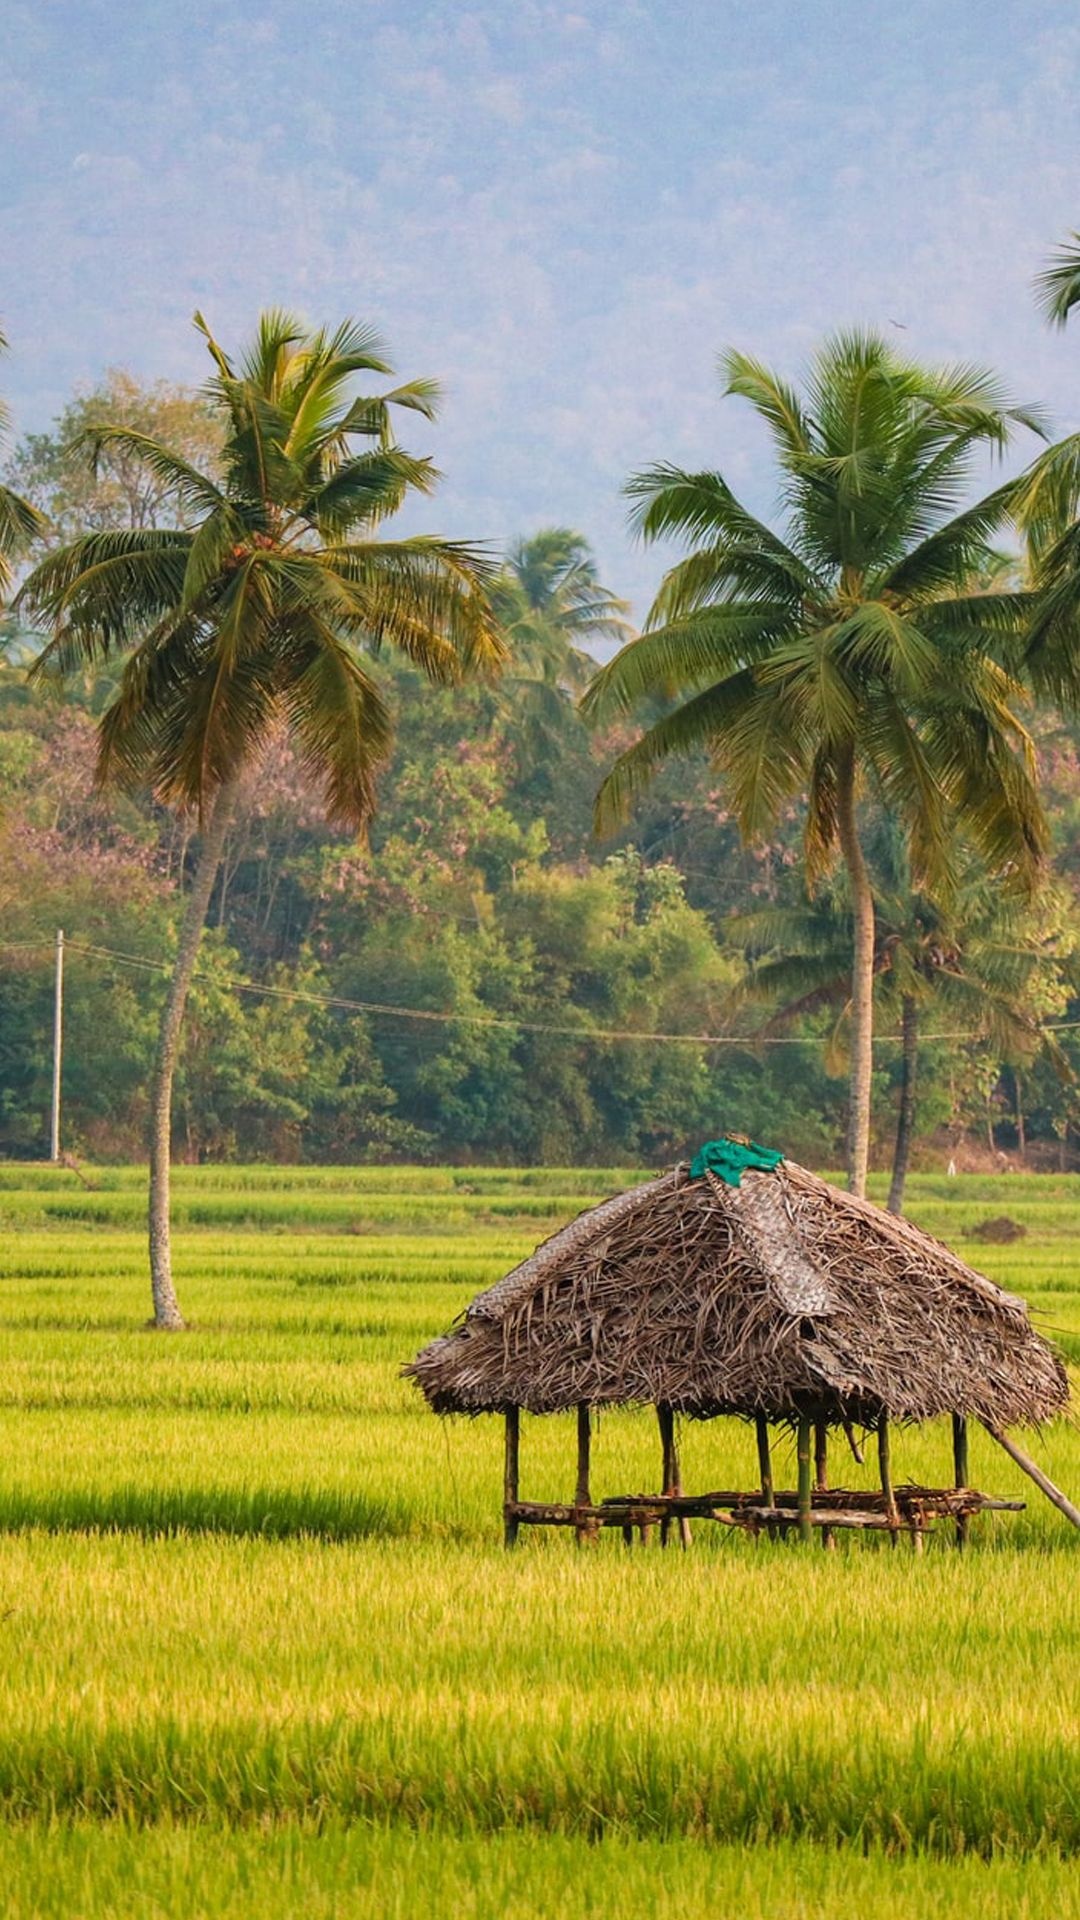 Kerala's paddy fields, Picturesque landscapes, Nature's palette, Captivating photography, 1080x1920 Full HD Handy